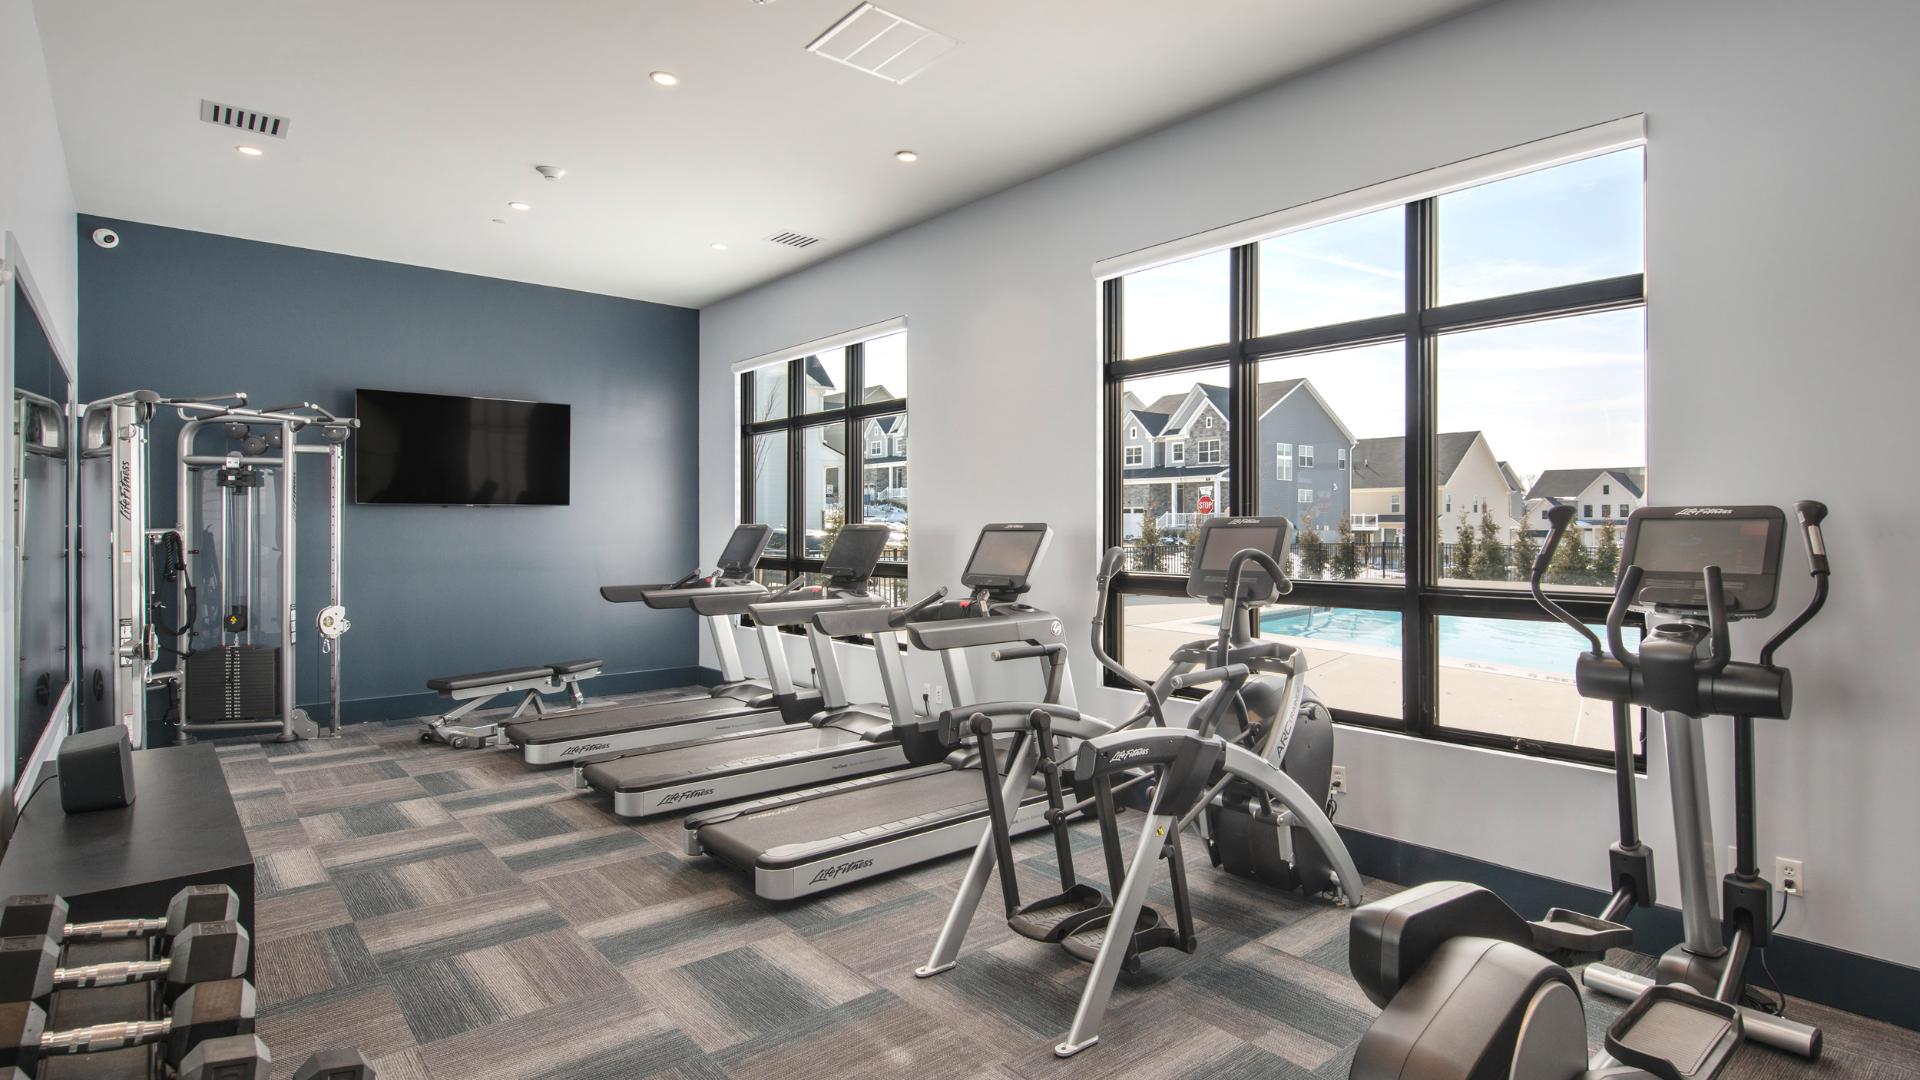 Fitness center, with views of the pool